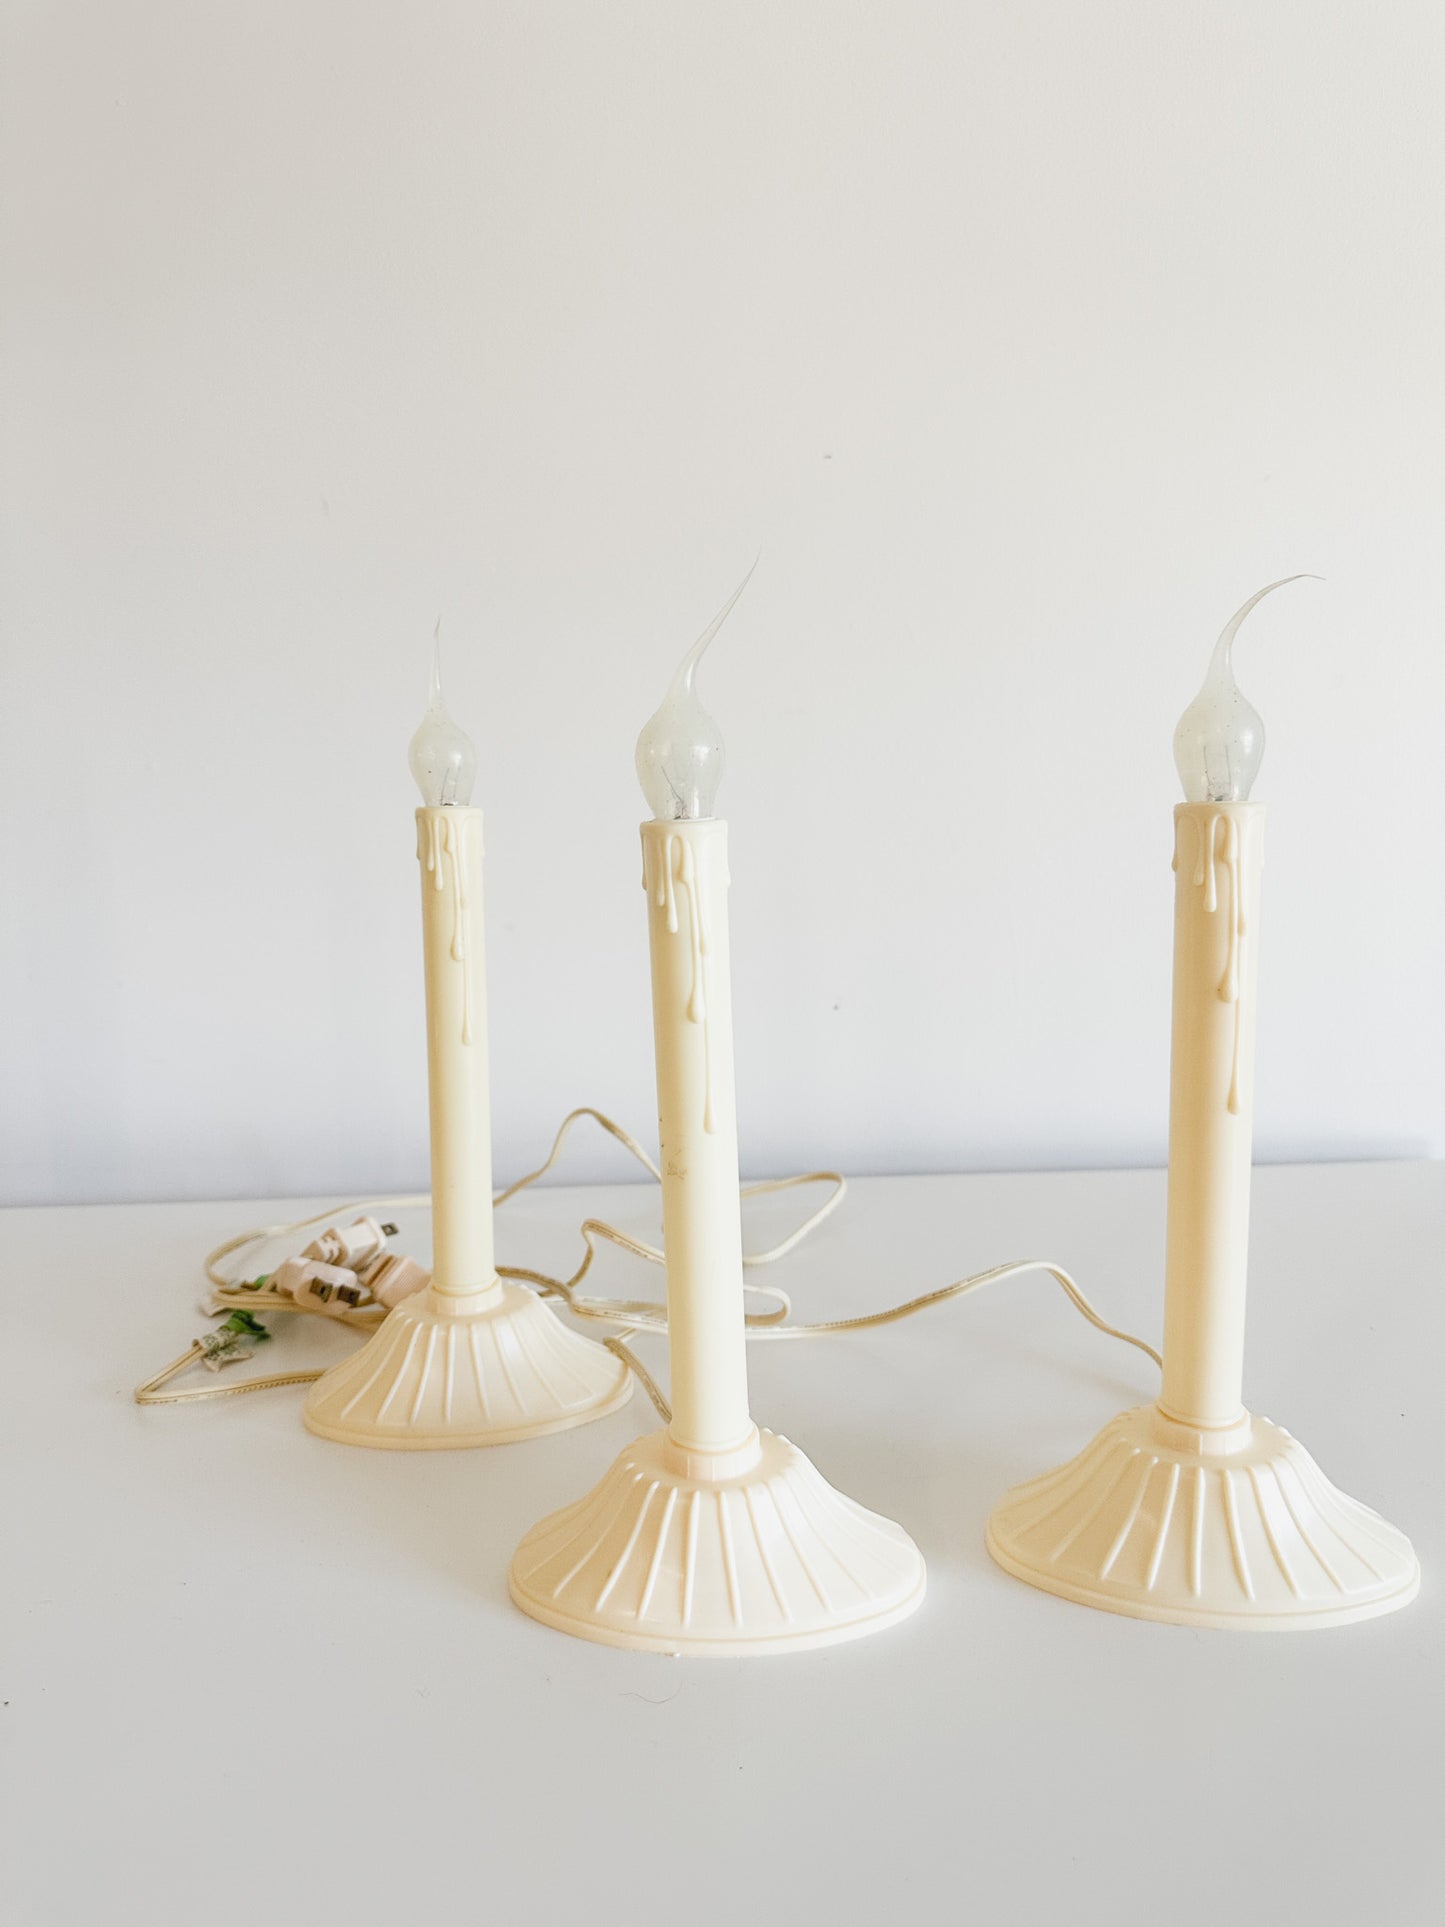 Lot of 3 Vintage Christmas Single Light Candolier | Electric Drip Candles with Bulbs